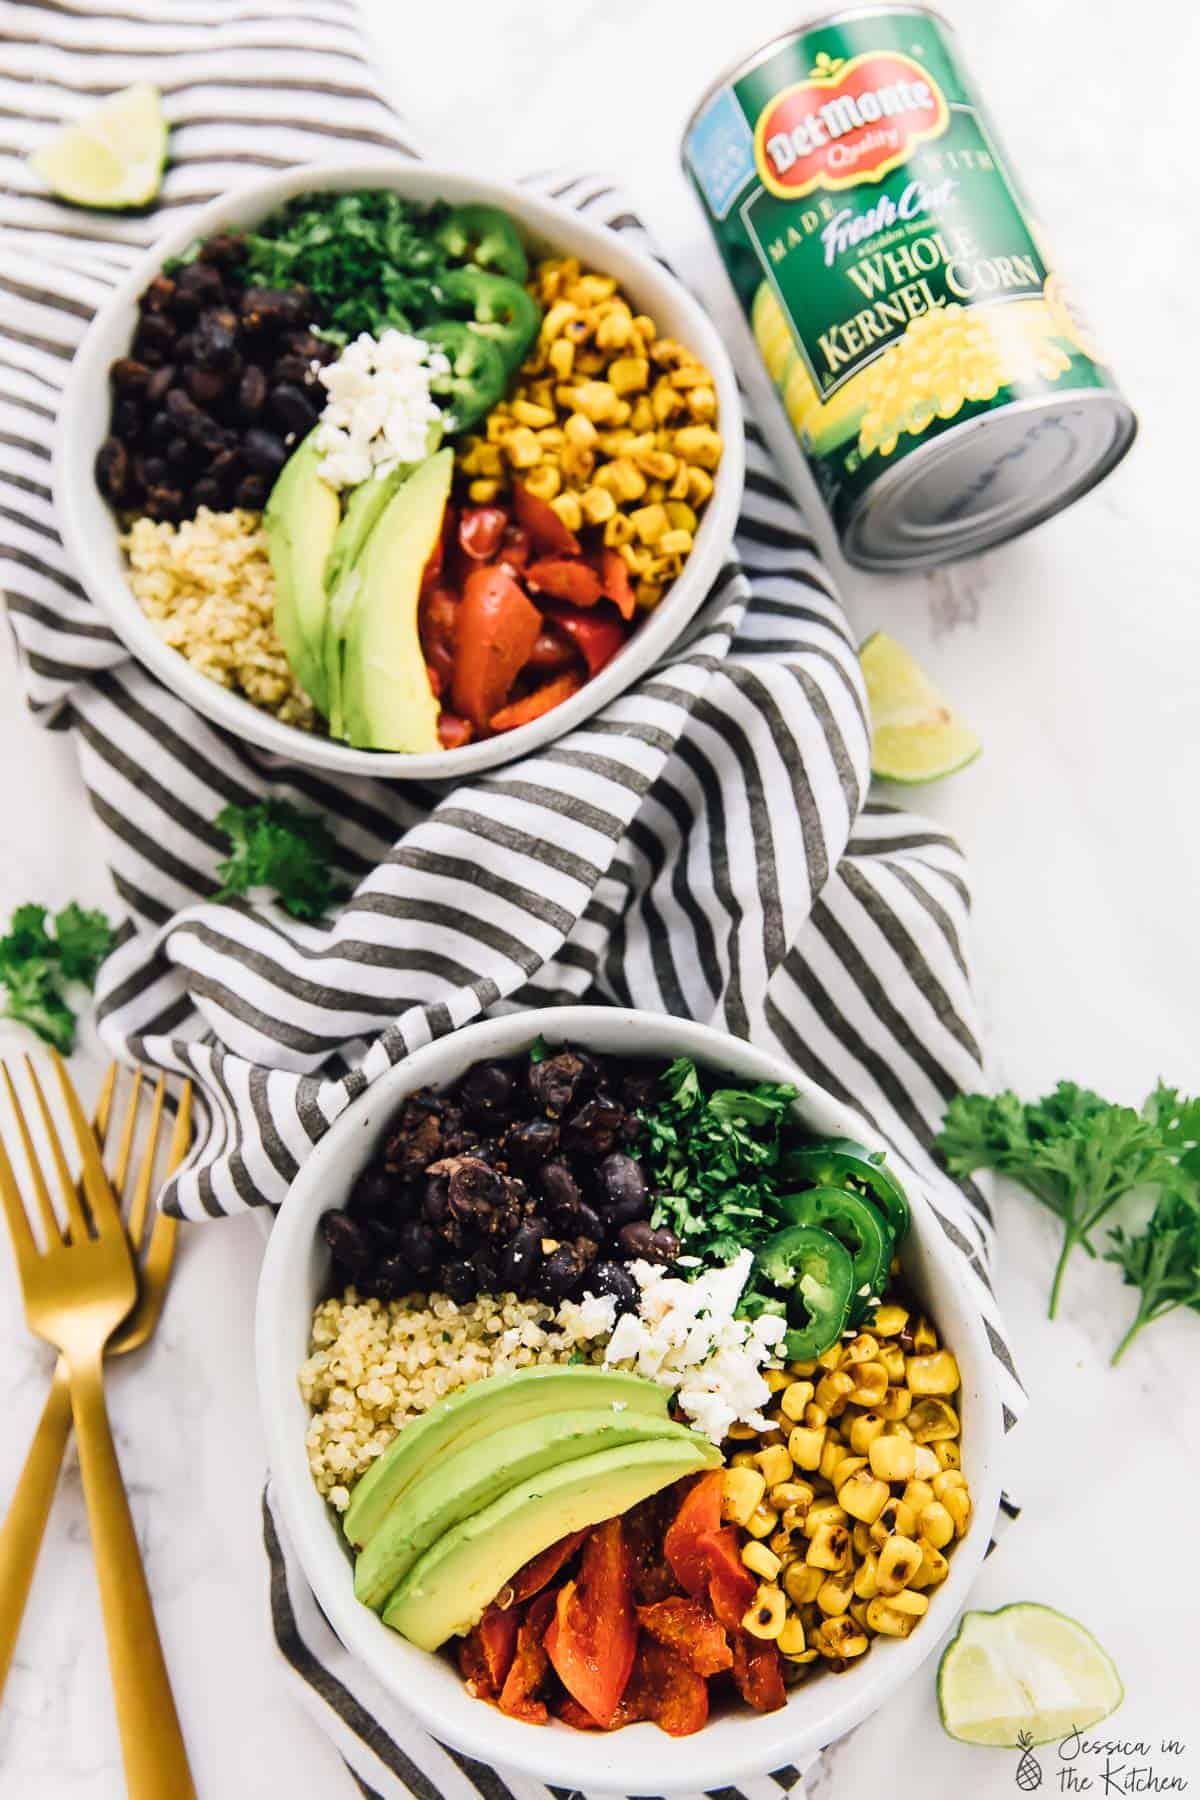 Two Mexican street corn burrito bowls with two gold forks, can of corn, and garnishes on tabletop